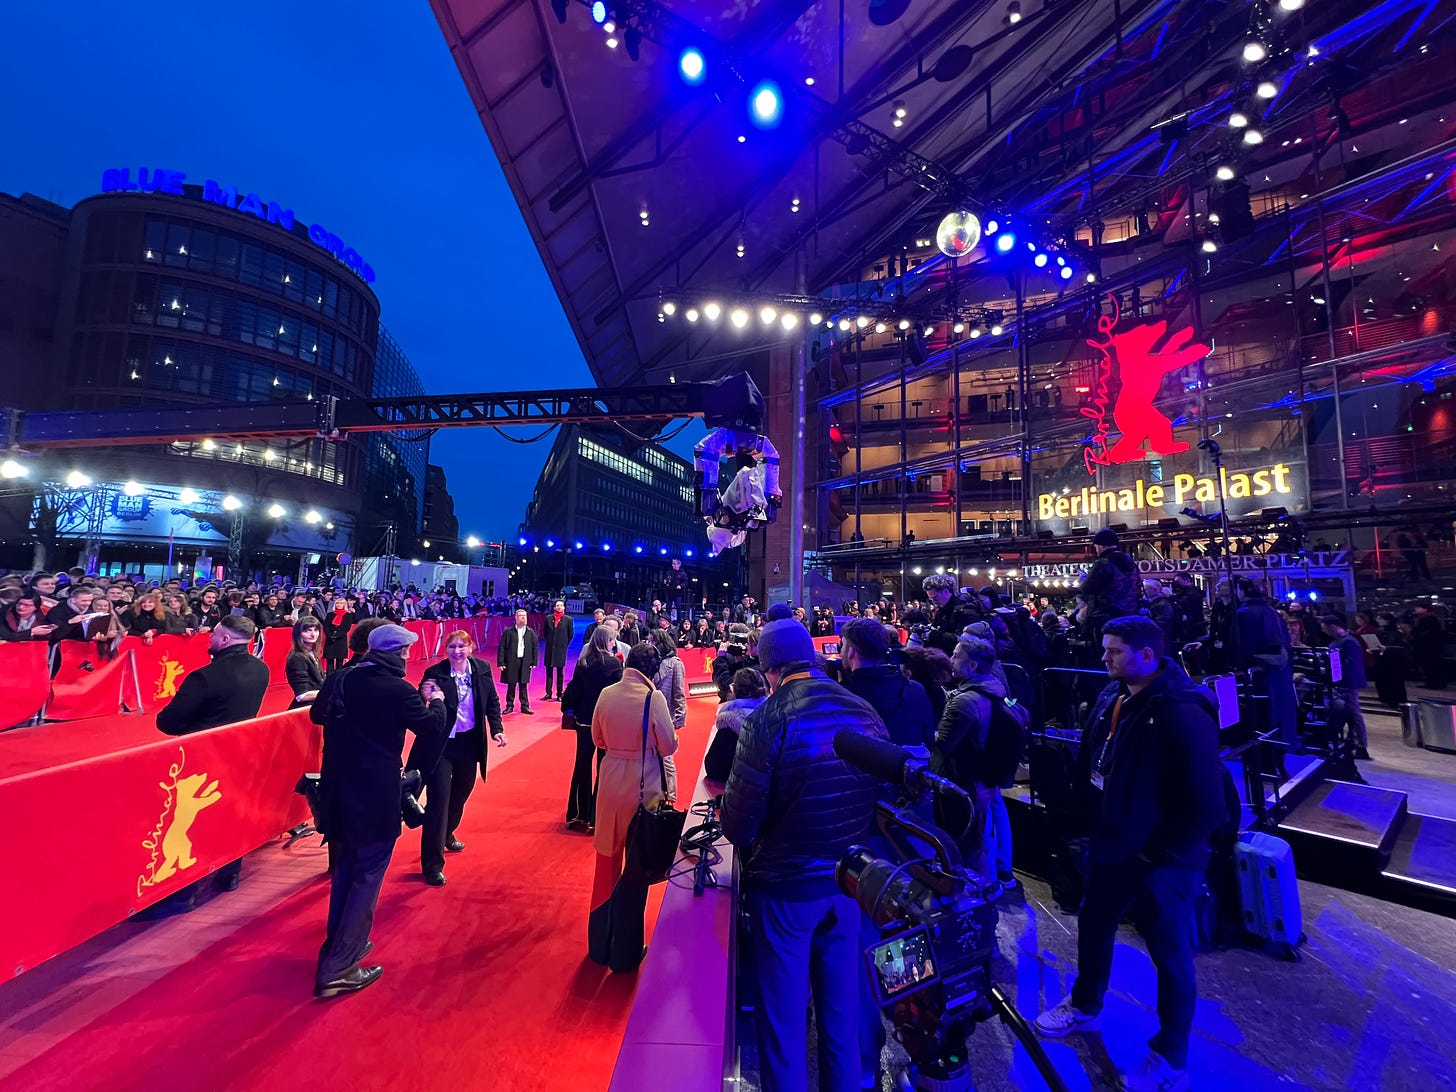 Berlinale opening ceremony red carpet